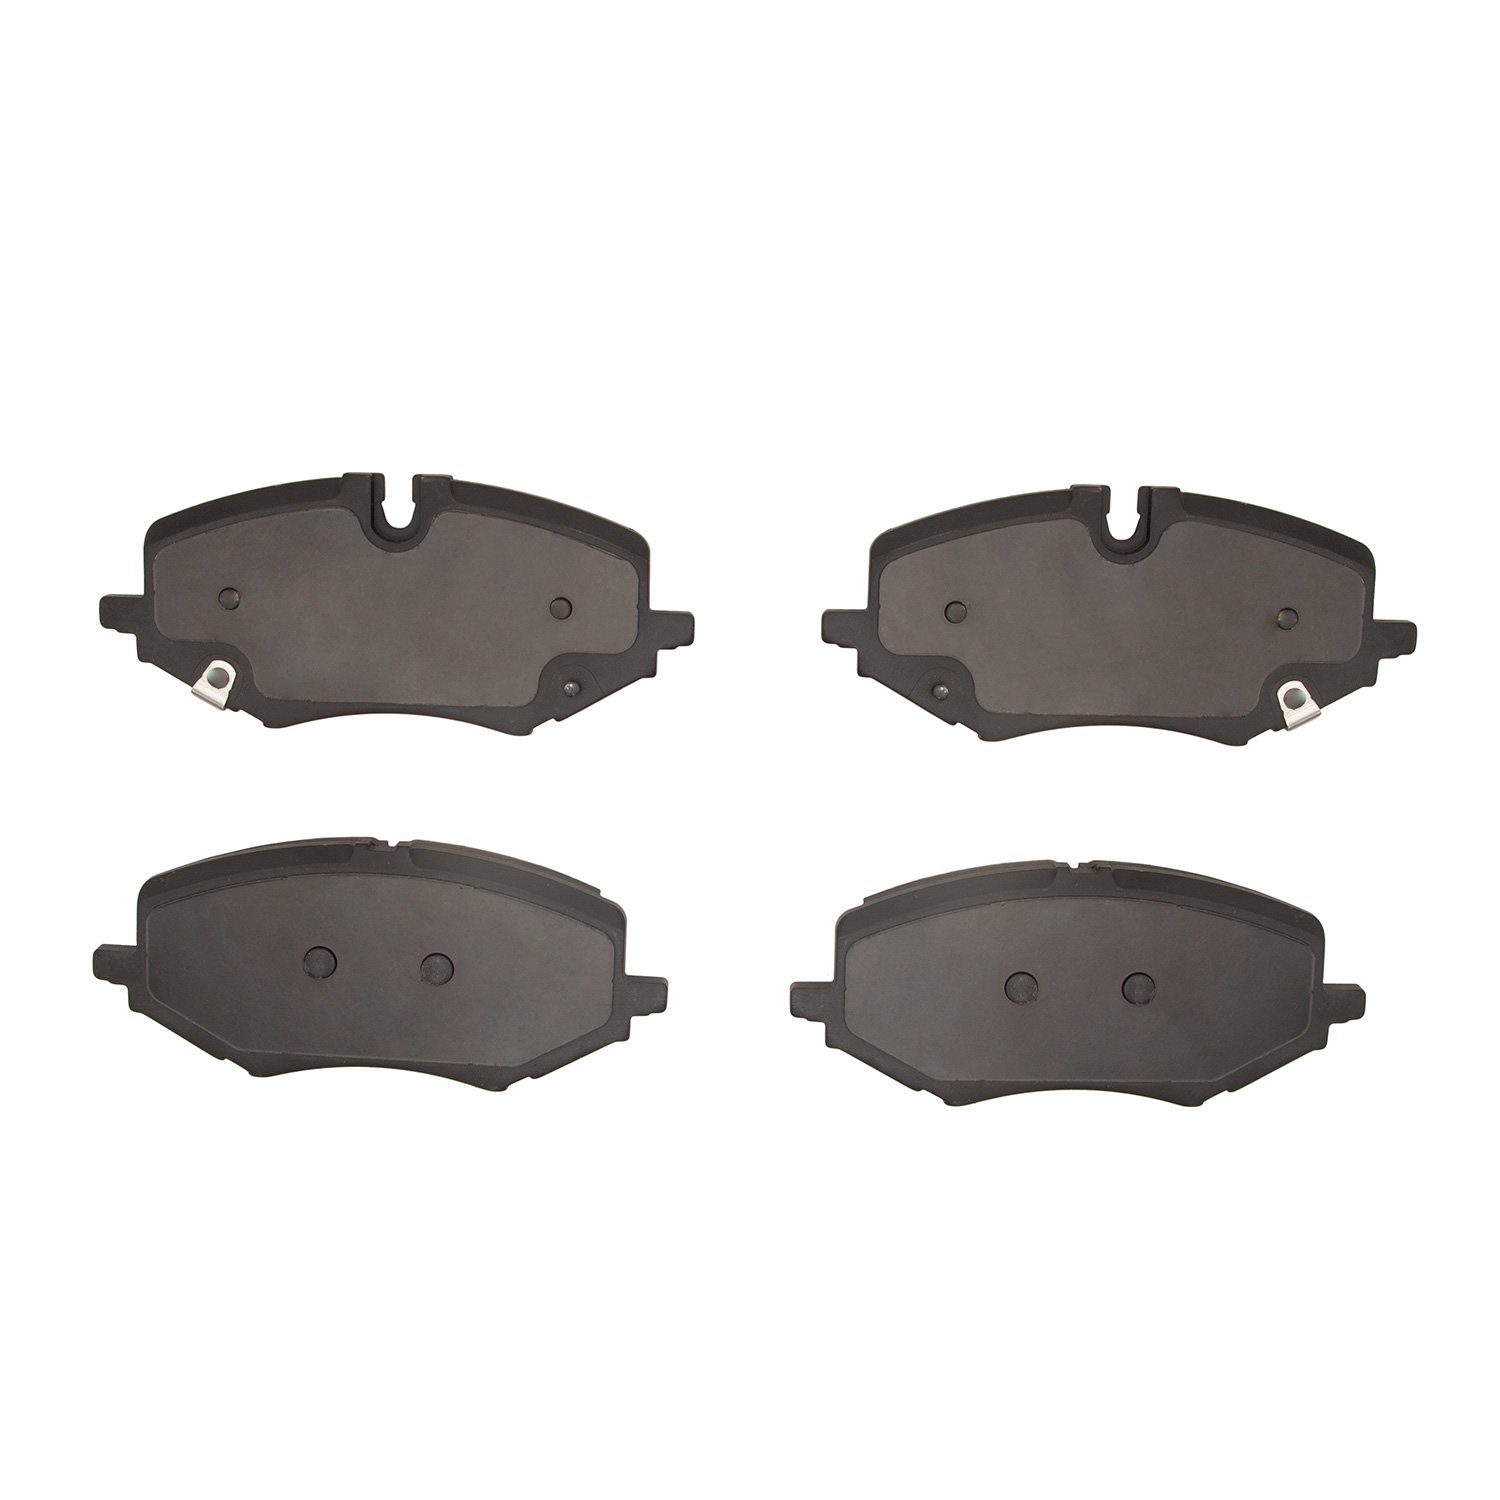 1310-2307-00 3000-Series Ceramic Brake Pads, Fits Select GM, Position: Front